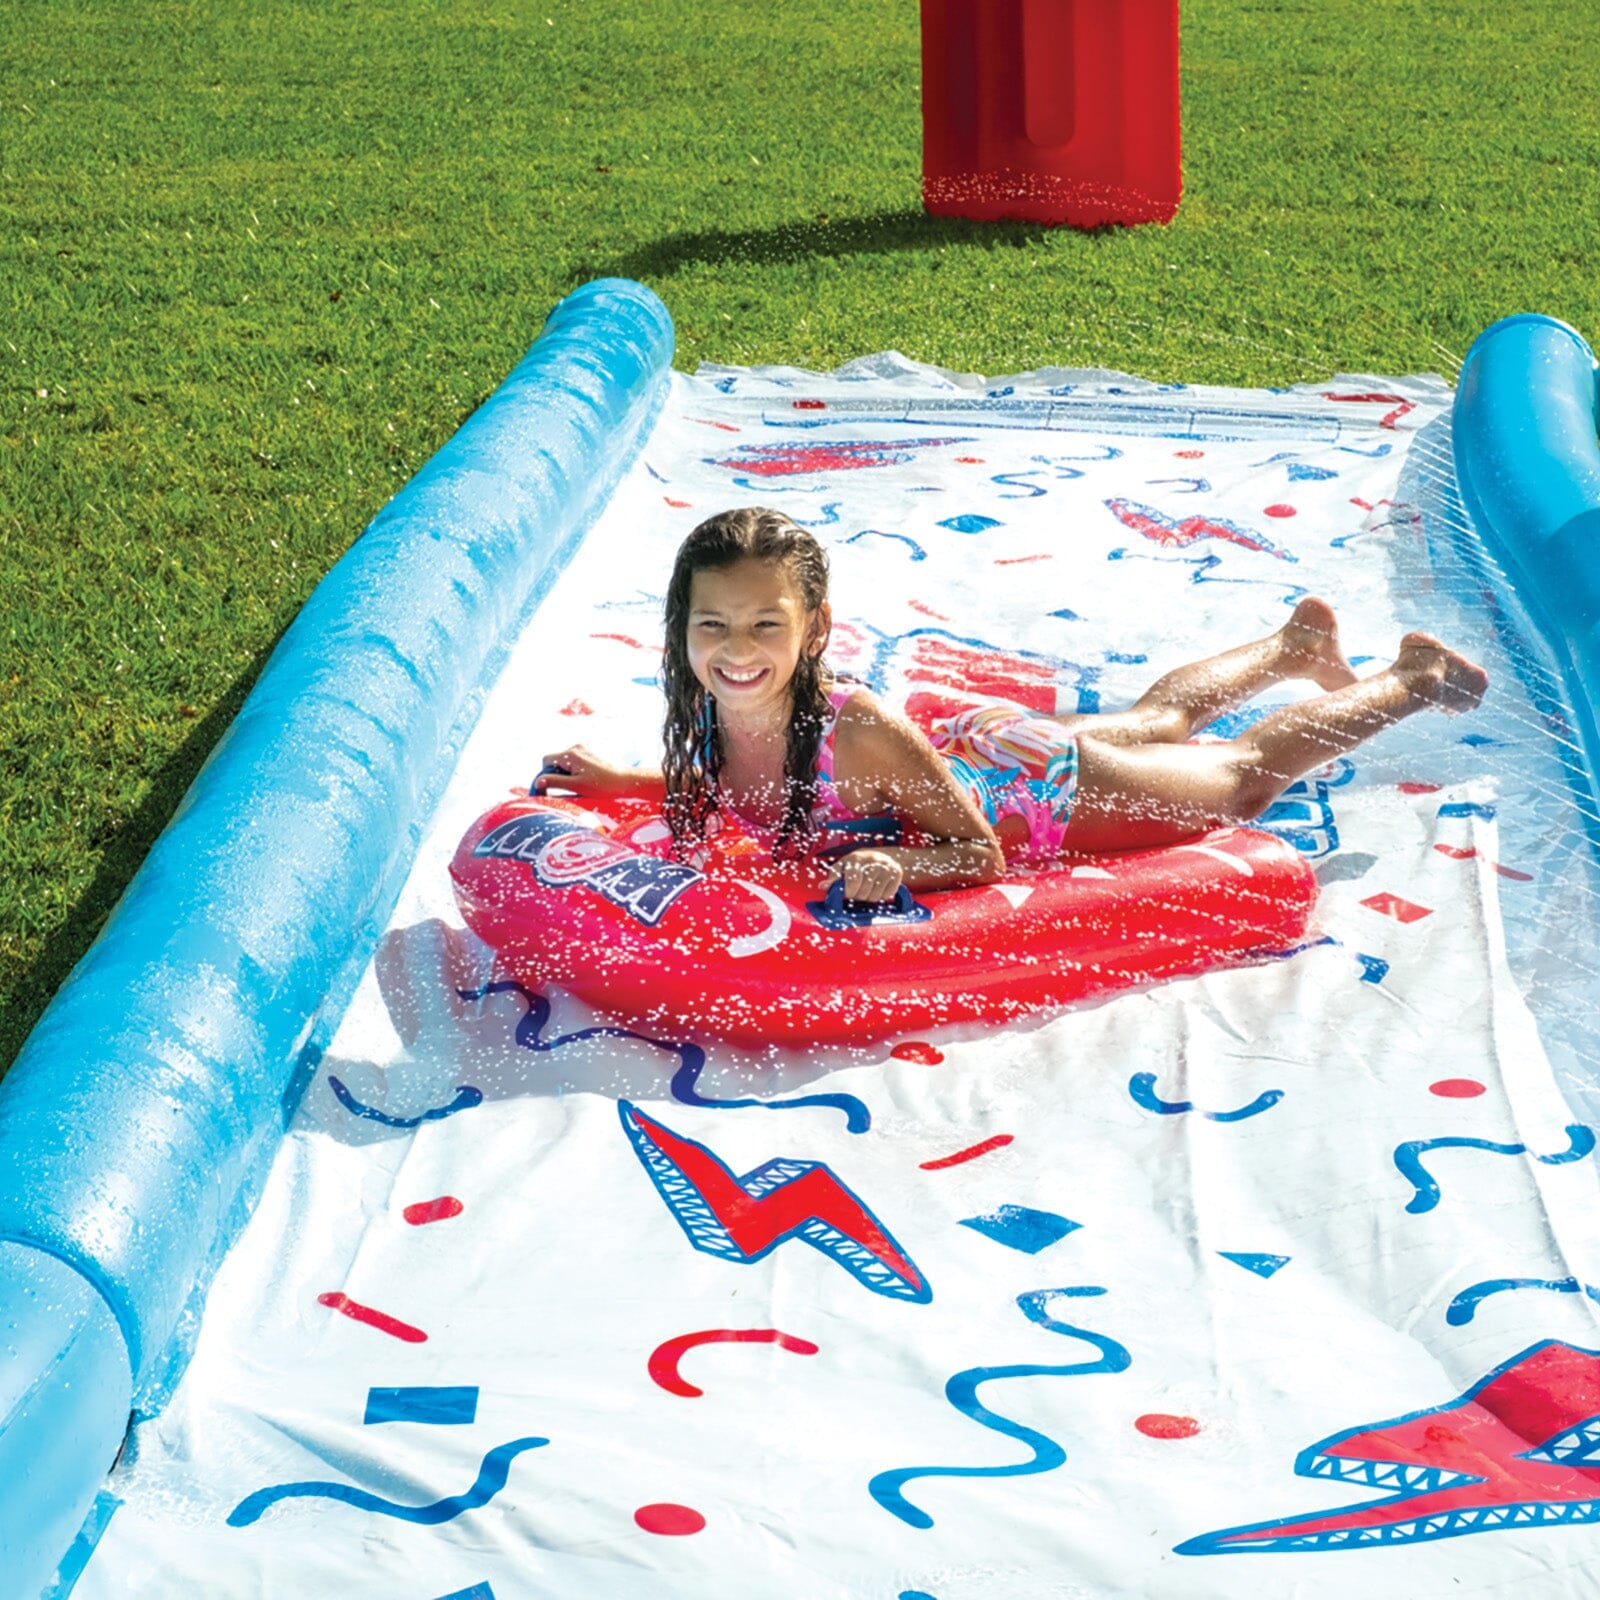 WOW Watersports Super Slide Giant Water Slide For Kids and Adults